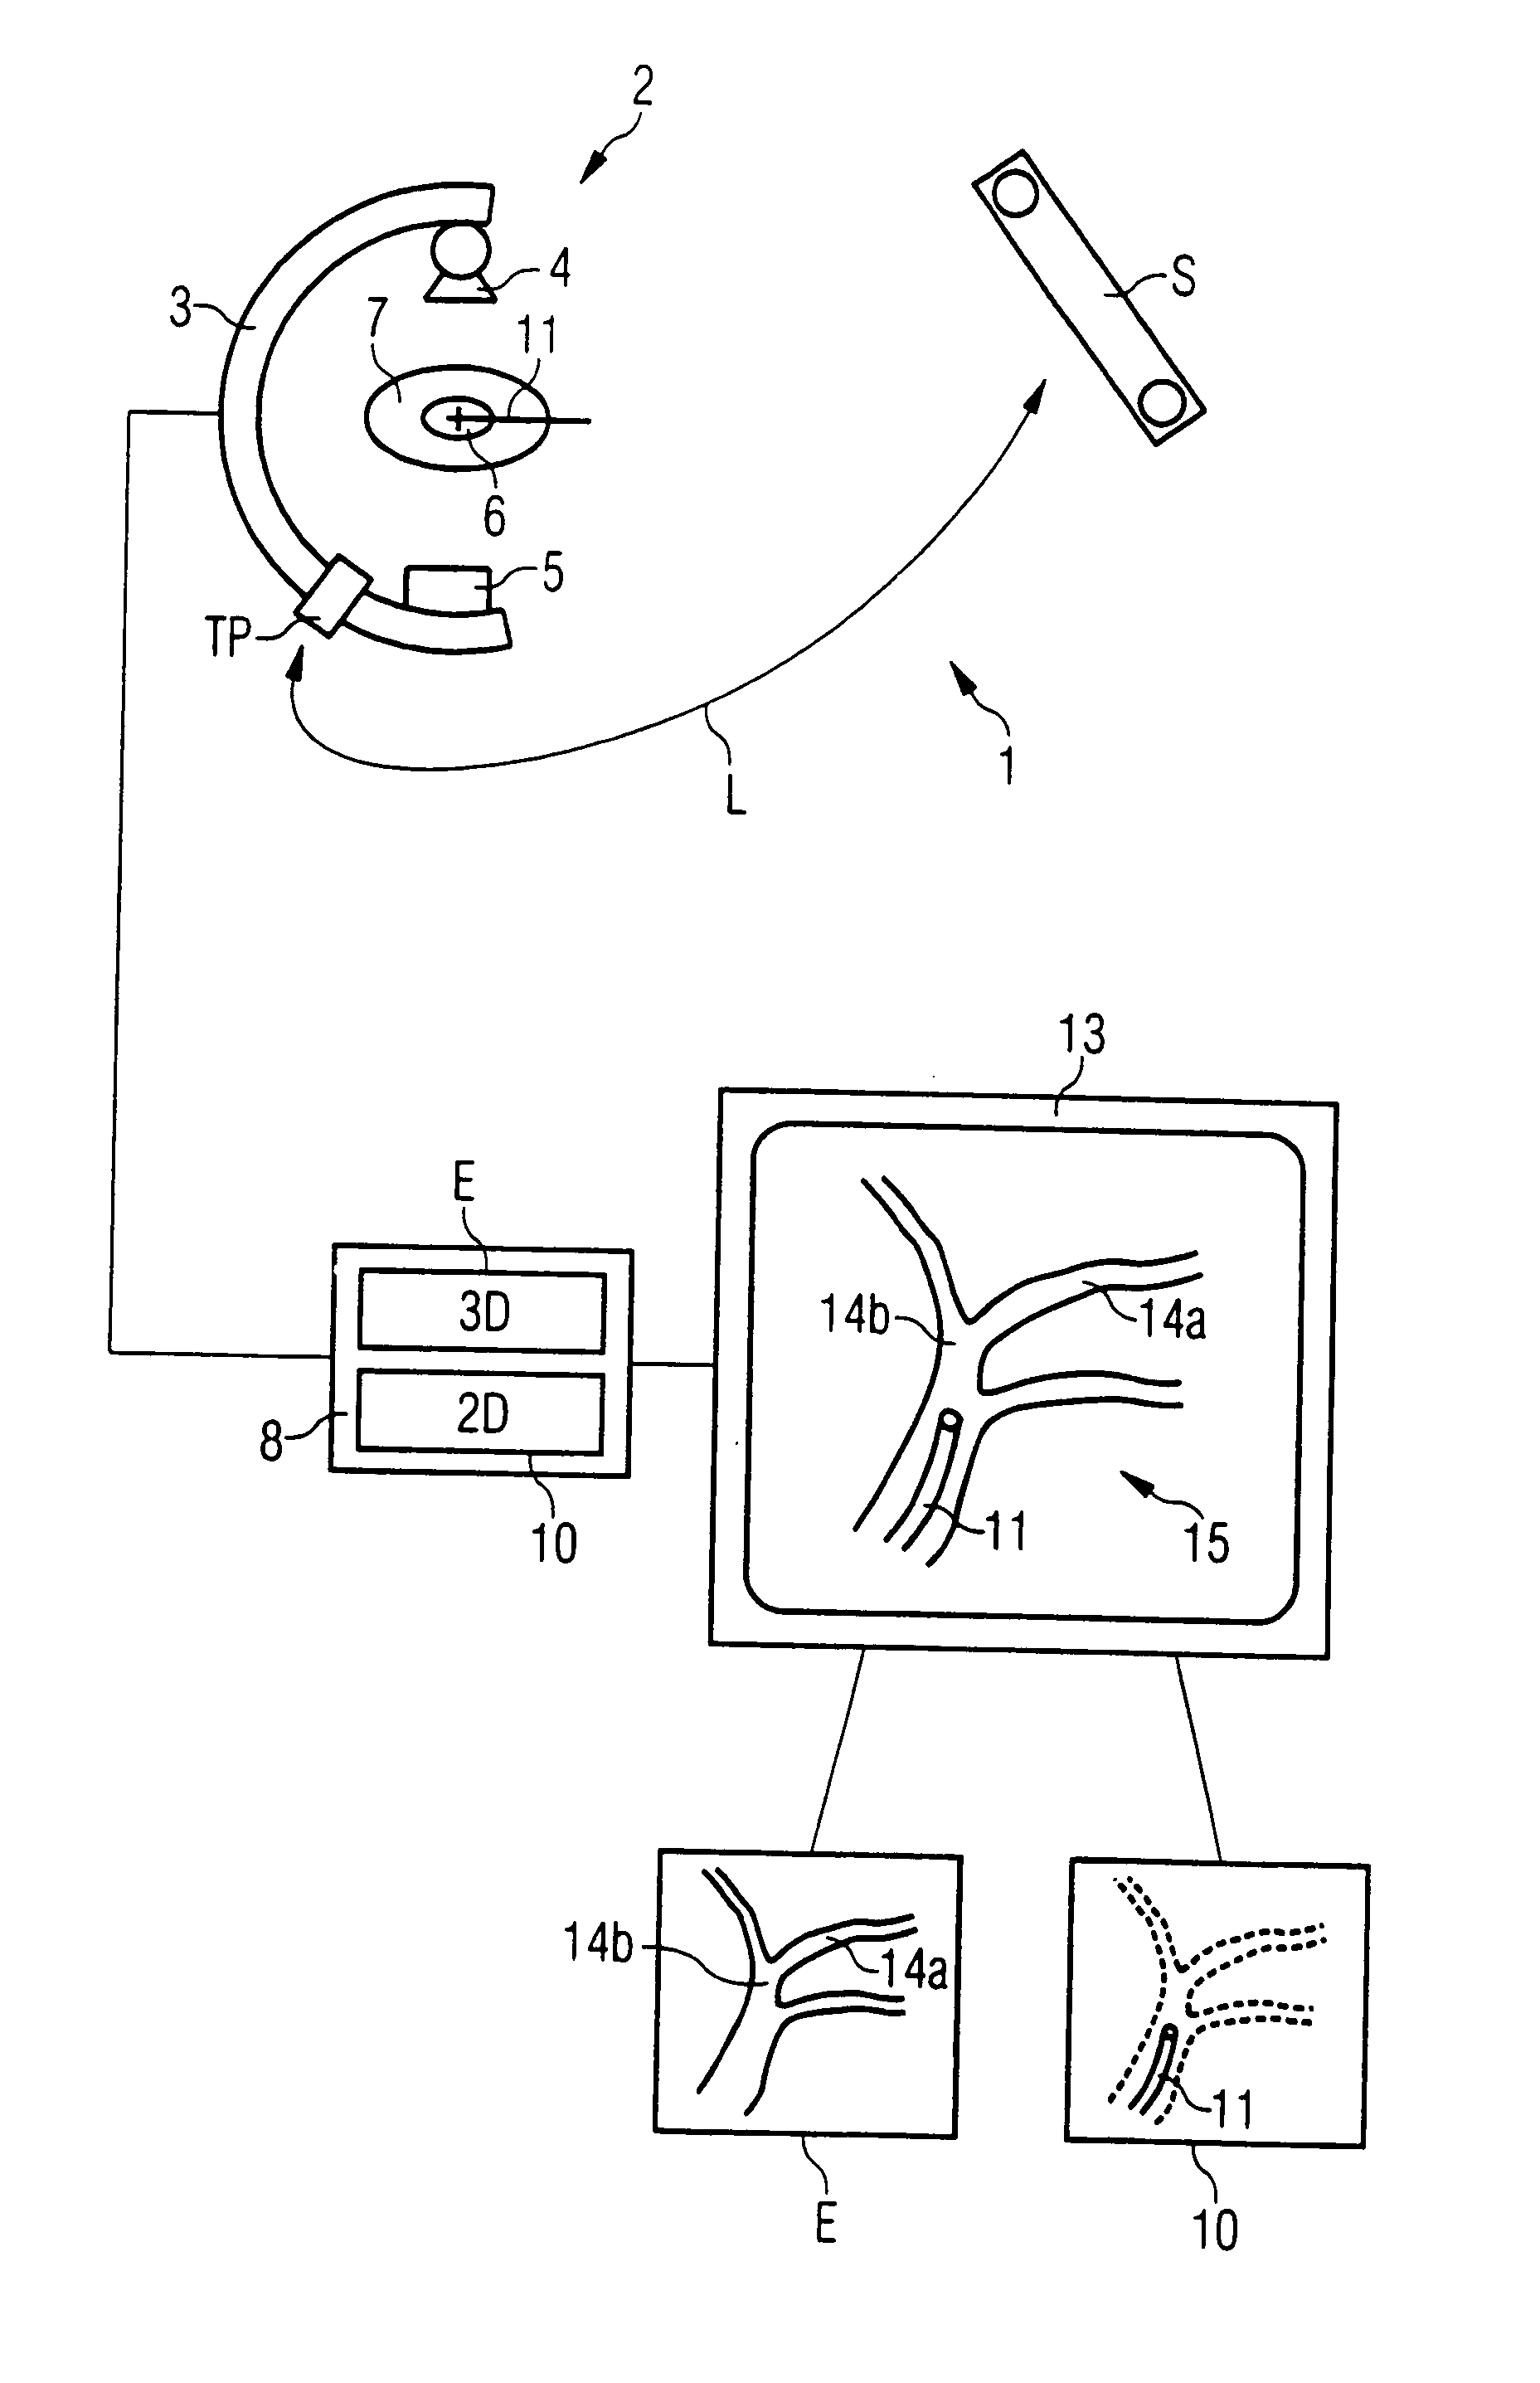 Method for automatically merging a 2D fluoroscopic C-arm image with a preoperative 3D image with one-time use of navigation markers